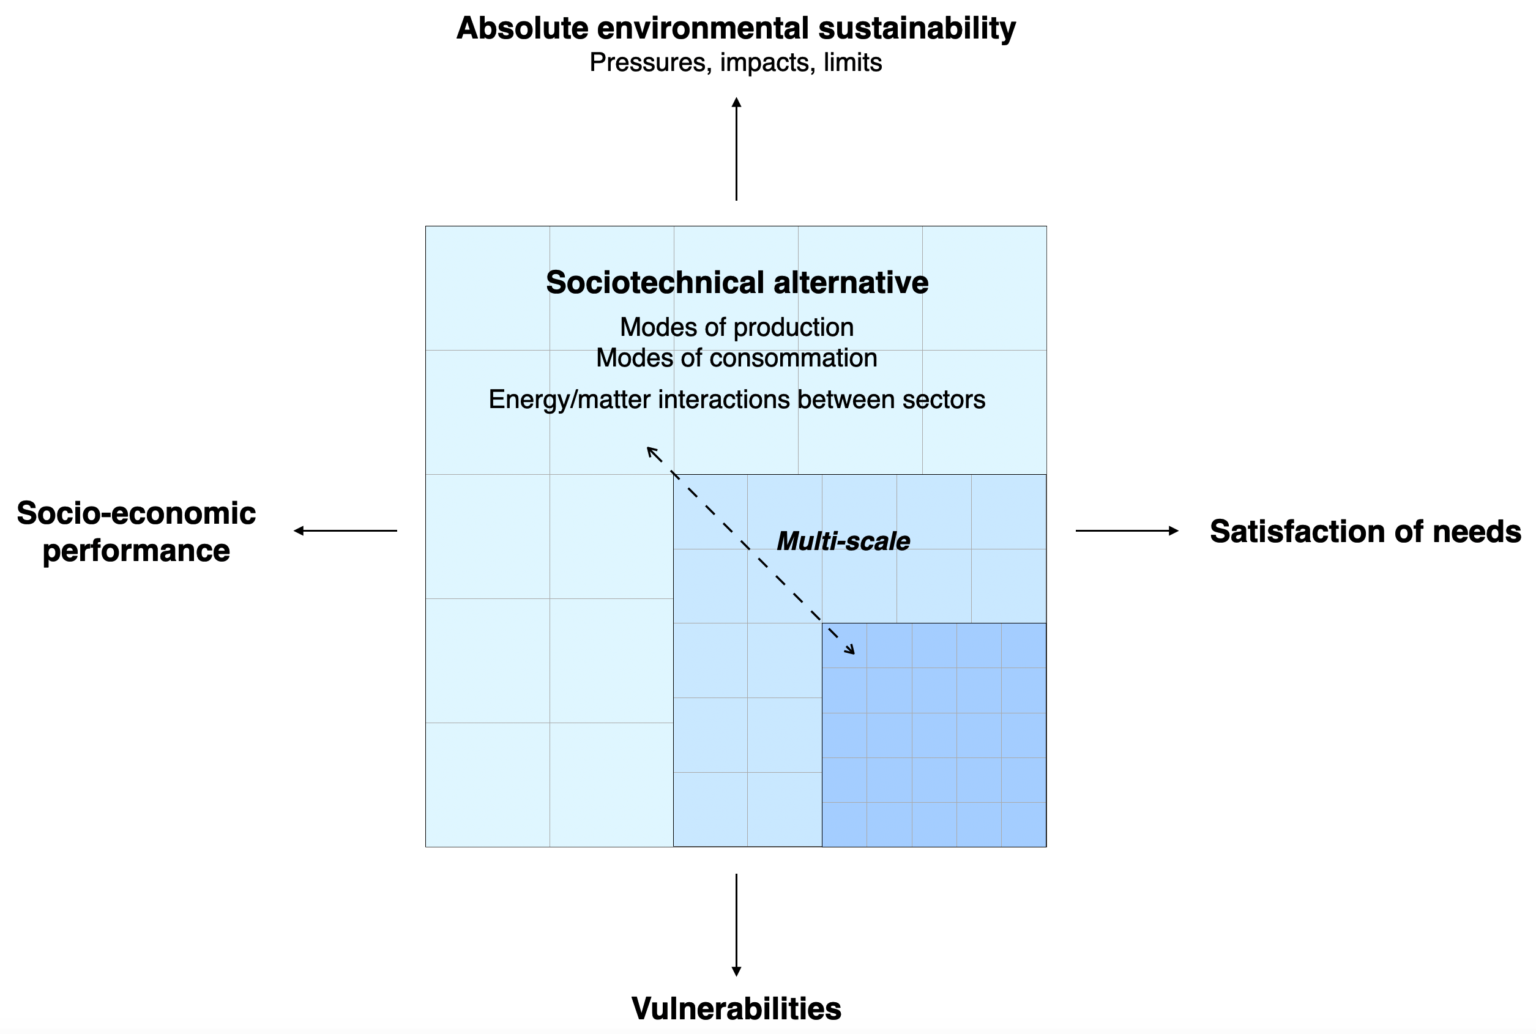 The figure shows, on the one hand, the basic definitions associated with sociotechnical alternatives: they correspond to modes of production and consumption and embody interactions between sectors, particularly pertaining to energy and resources. On the other hand, the figure illustrates the four planned modes of assessing such sociotechnical alternatives: assessment in terms of vulnerabilities, need satisfaction, socio-economic perfomance, and absolute environmental sustainability.